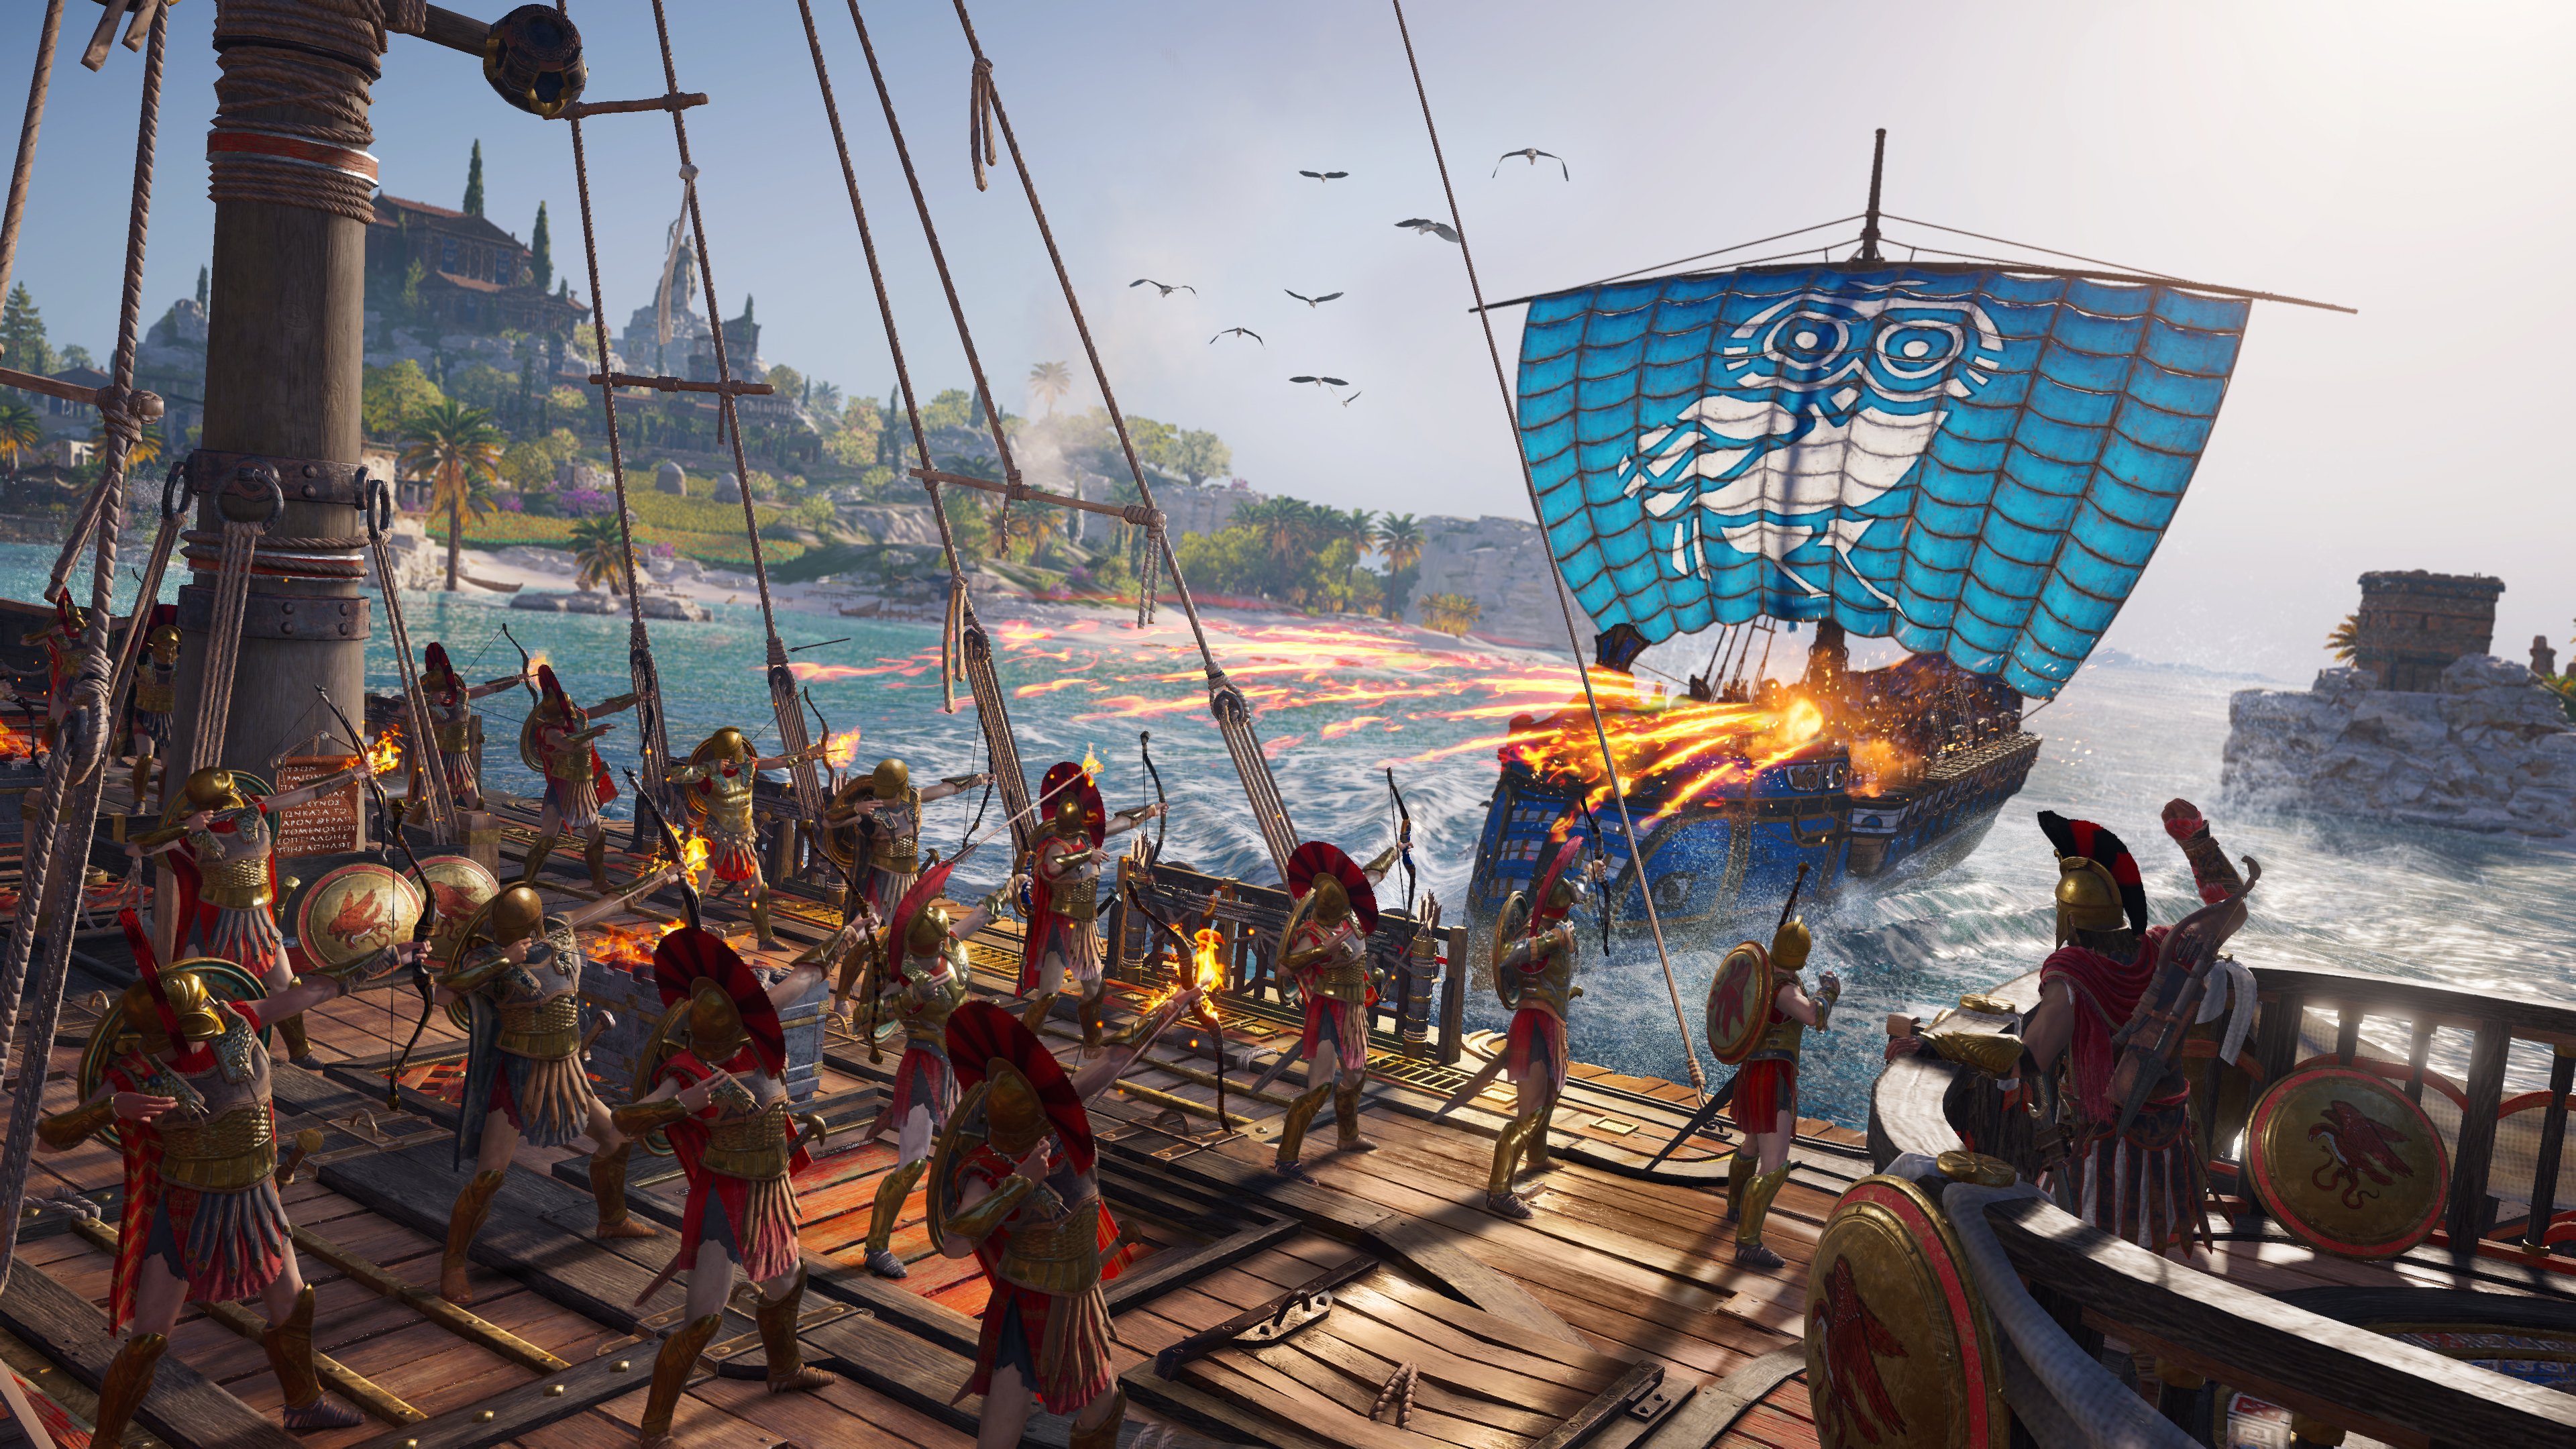 assassin's creed odyssey, video game, archer, ship, spartan, assassin's creed cellphone